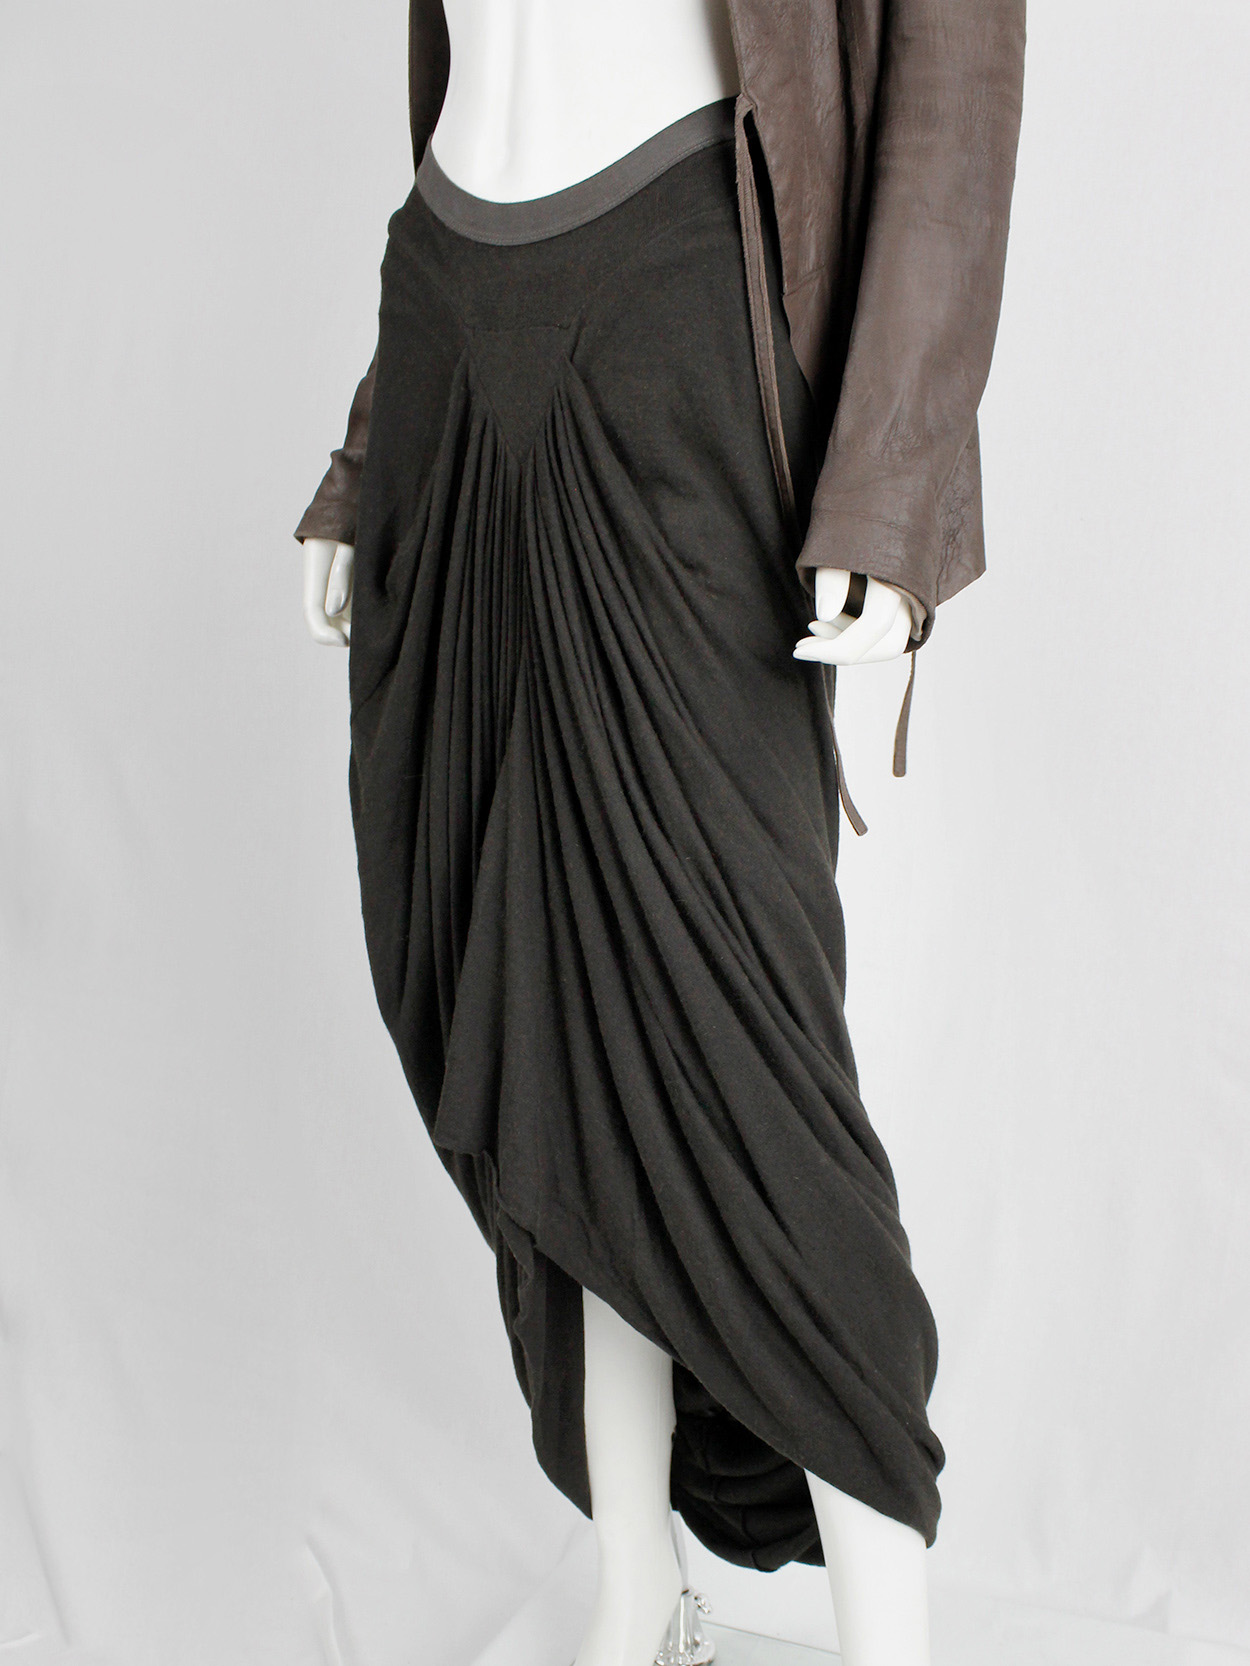 Rick Owens lilies brown skirt with pleated front and back cowl drape ...